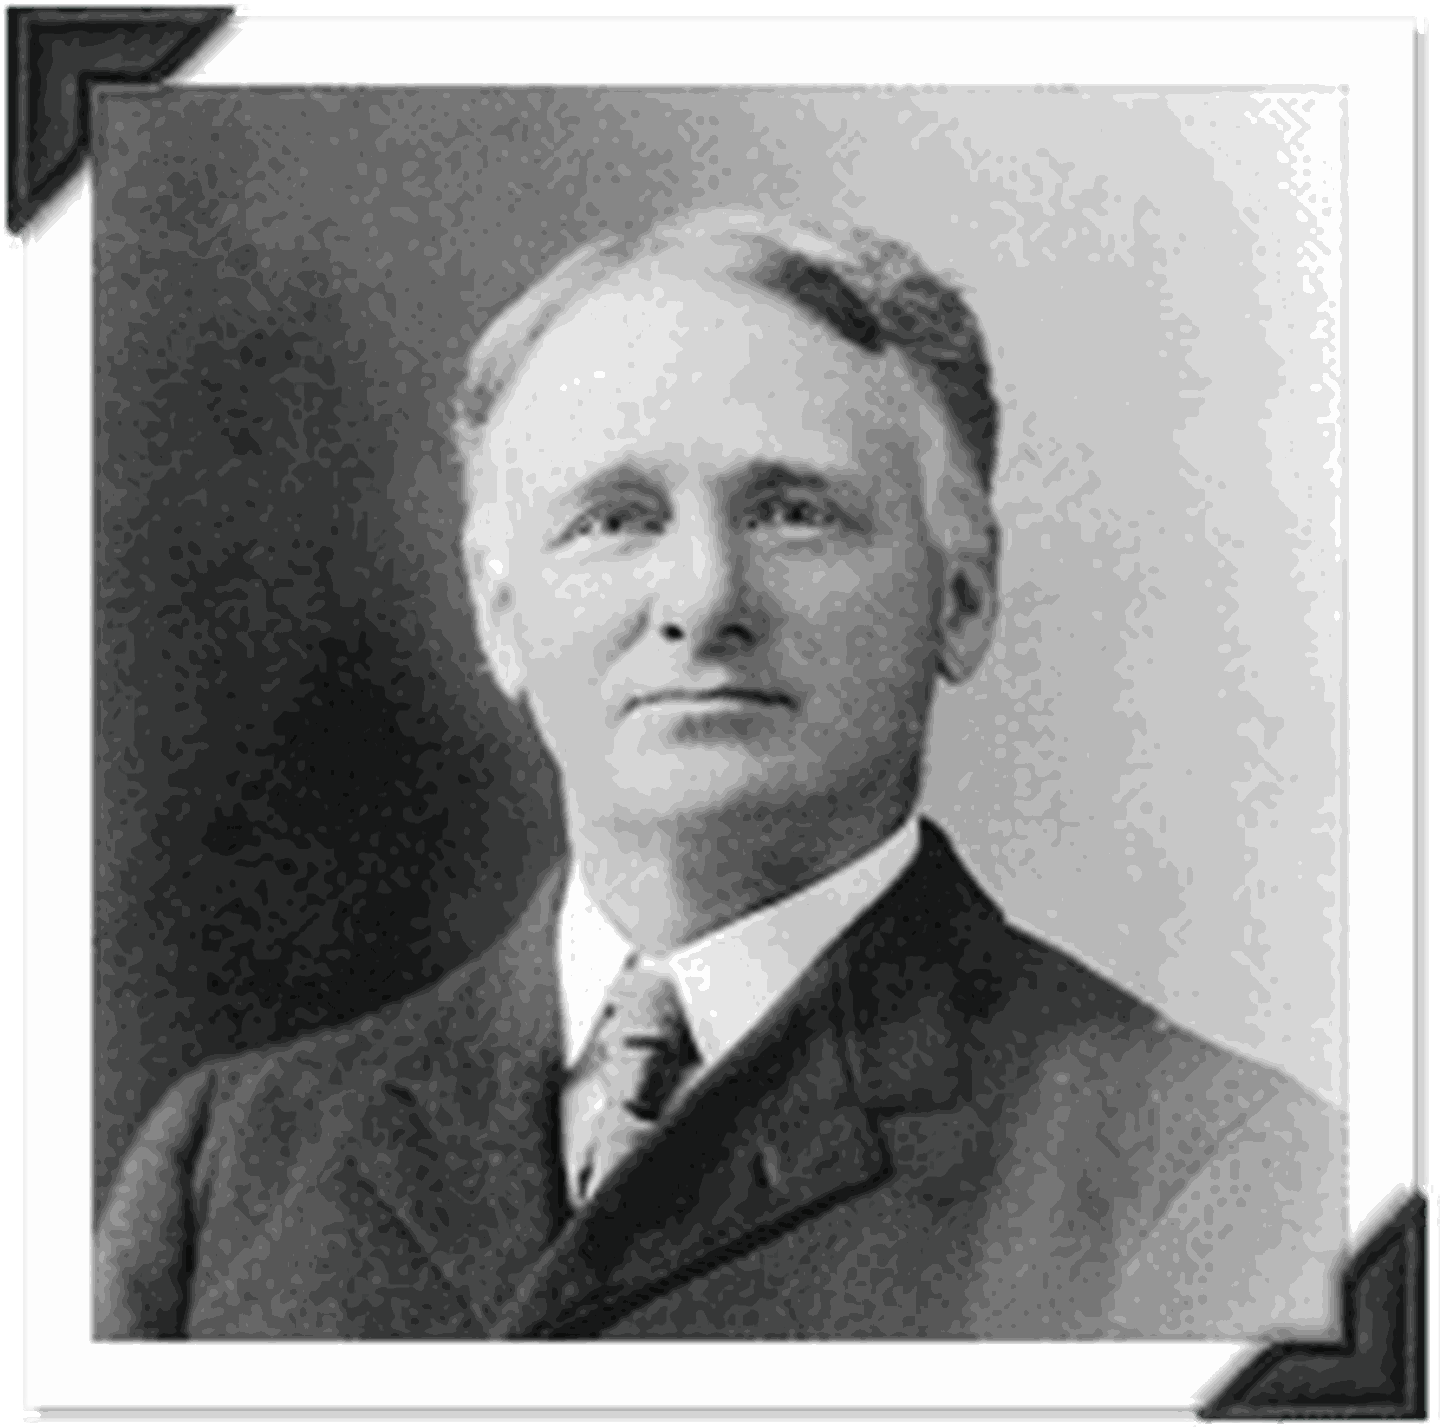 Judge John M. Cheney was an Orlando attorney who also became principal owner of the Orlando Utilities Commission